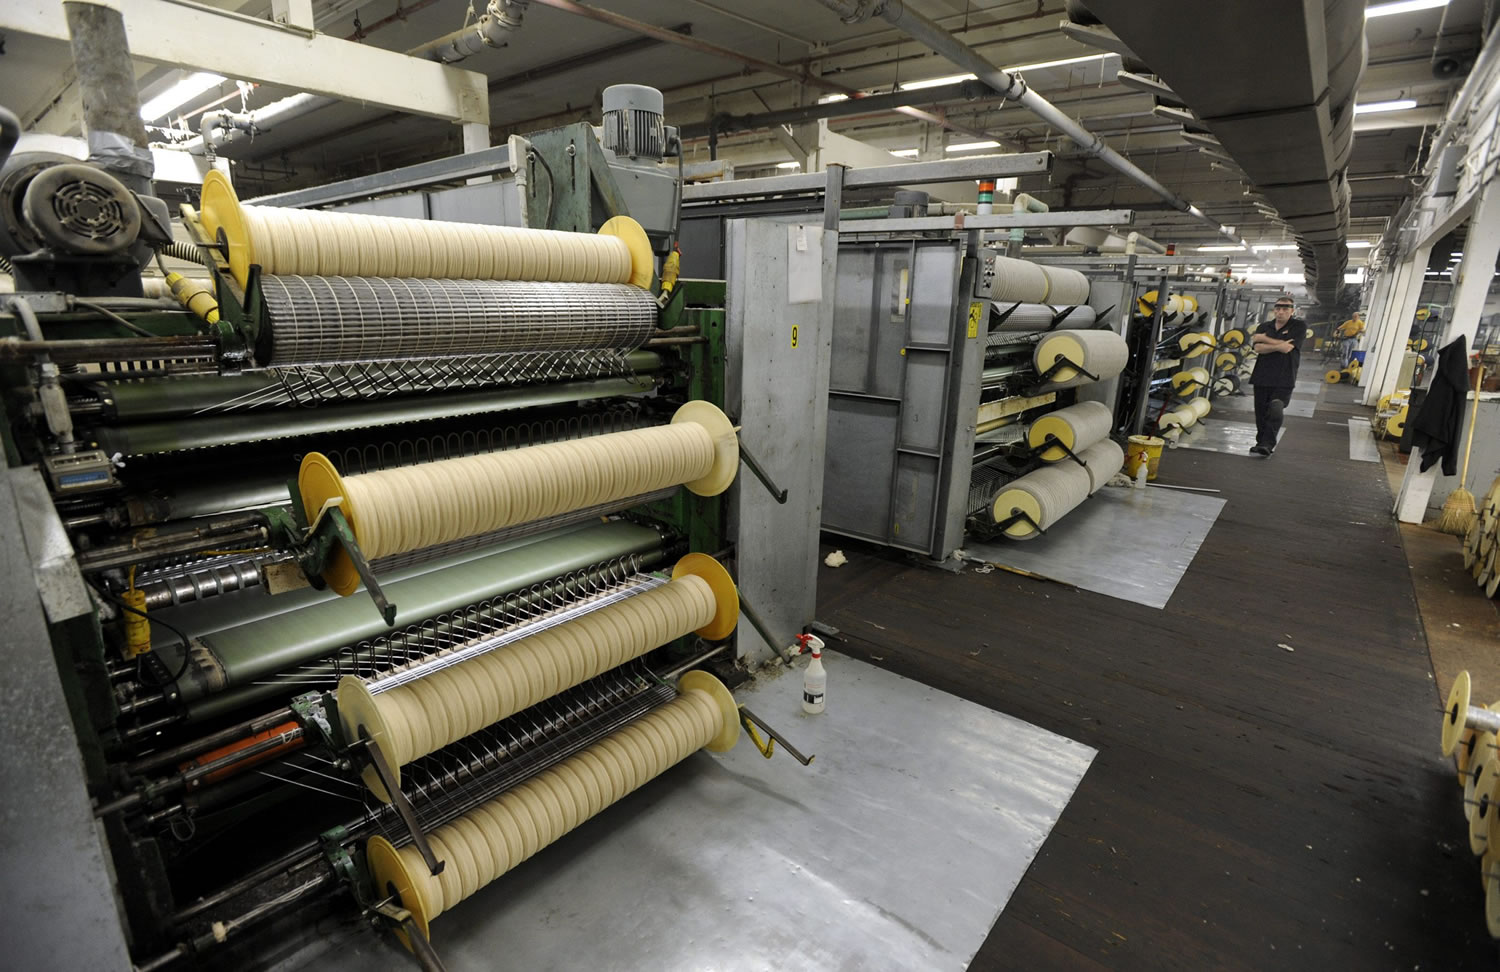 Wool yarn is carded at the Pendleton Woolen Mills.